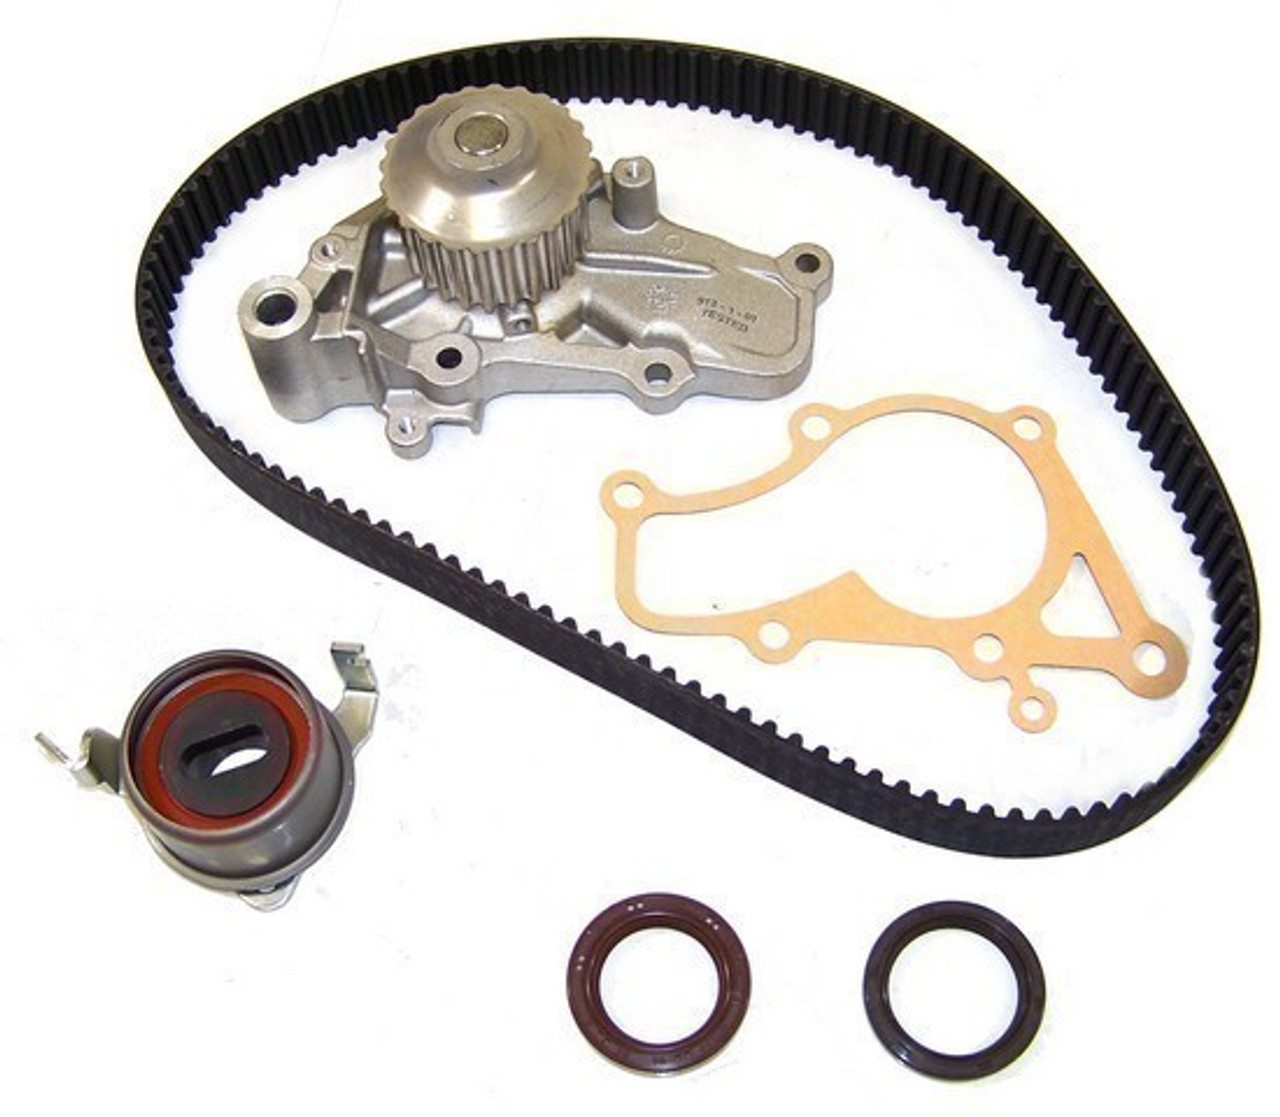 1993 Eagle Summit 1.8L Engine Timing Belt Kit with Water Pump TBK119WP -2